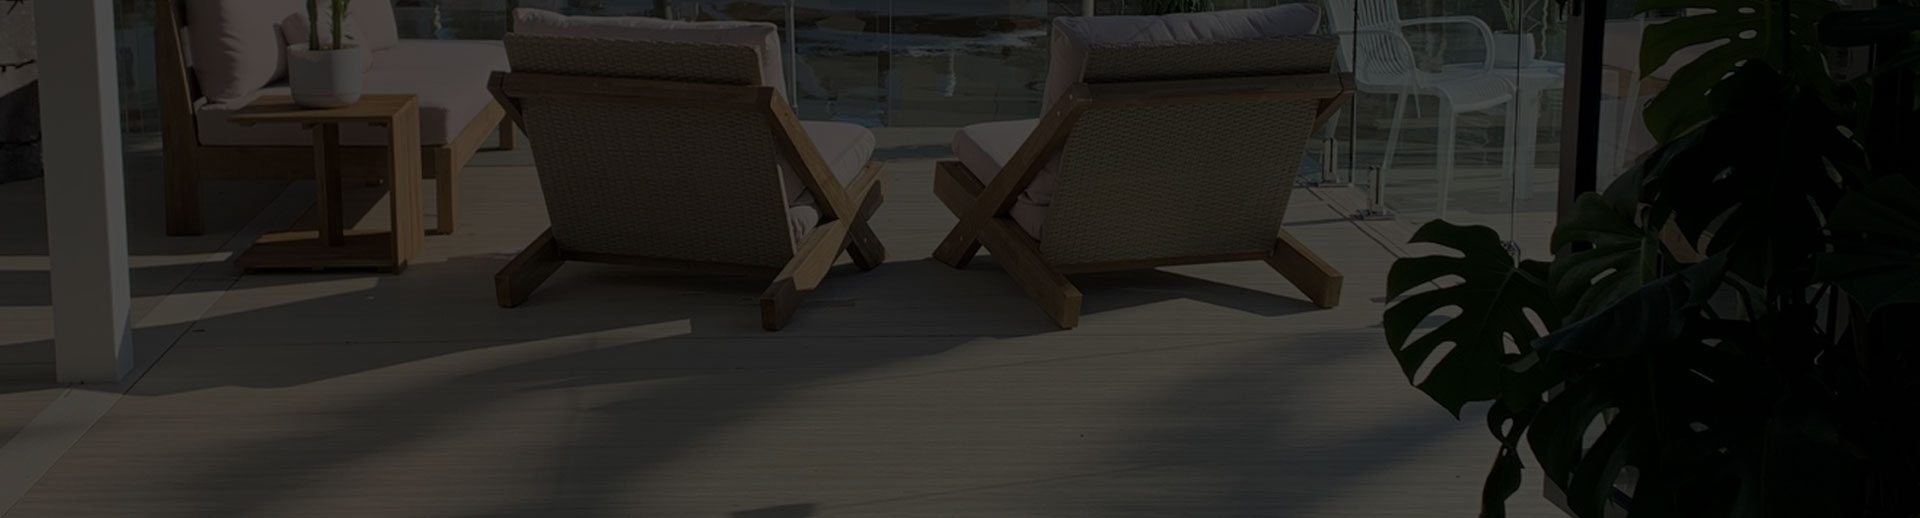 Residential Use of Wood Plastic Composite Products